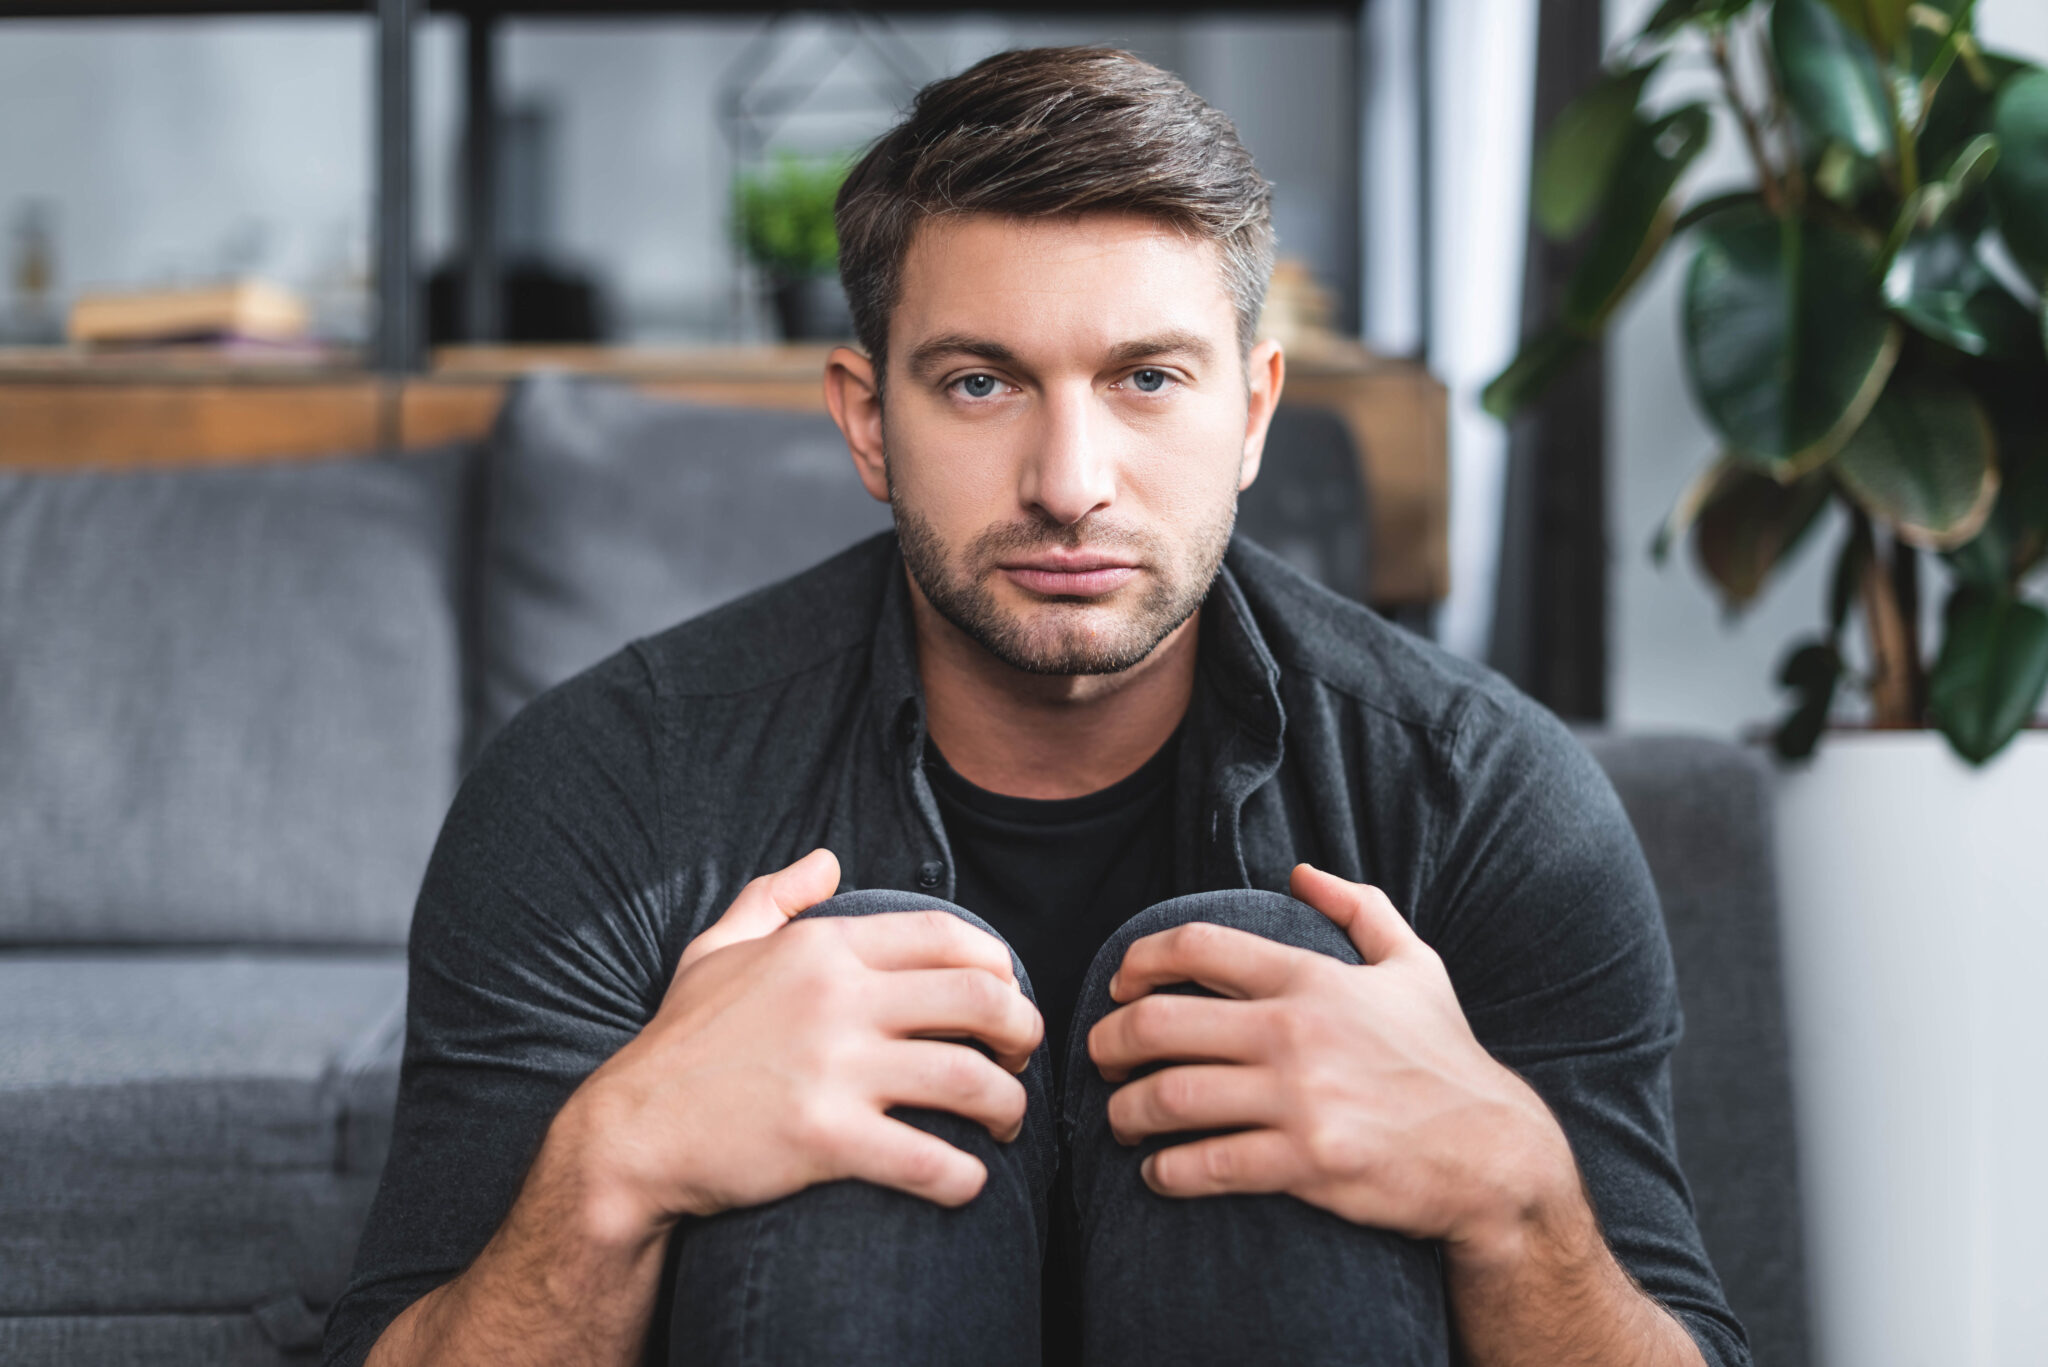 handsome man with panic attack hugging legs in apartment